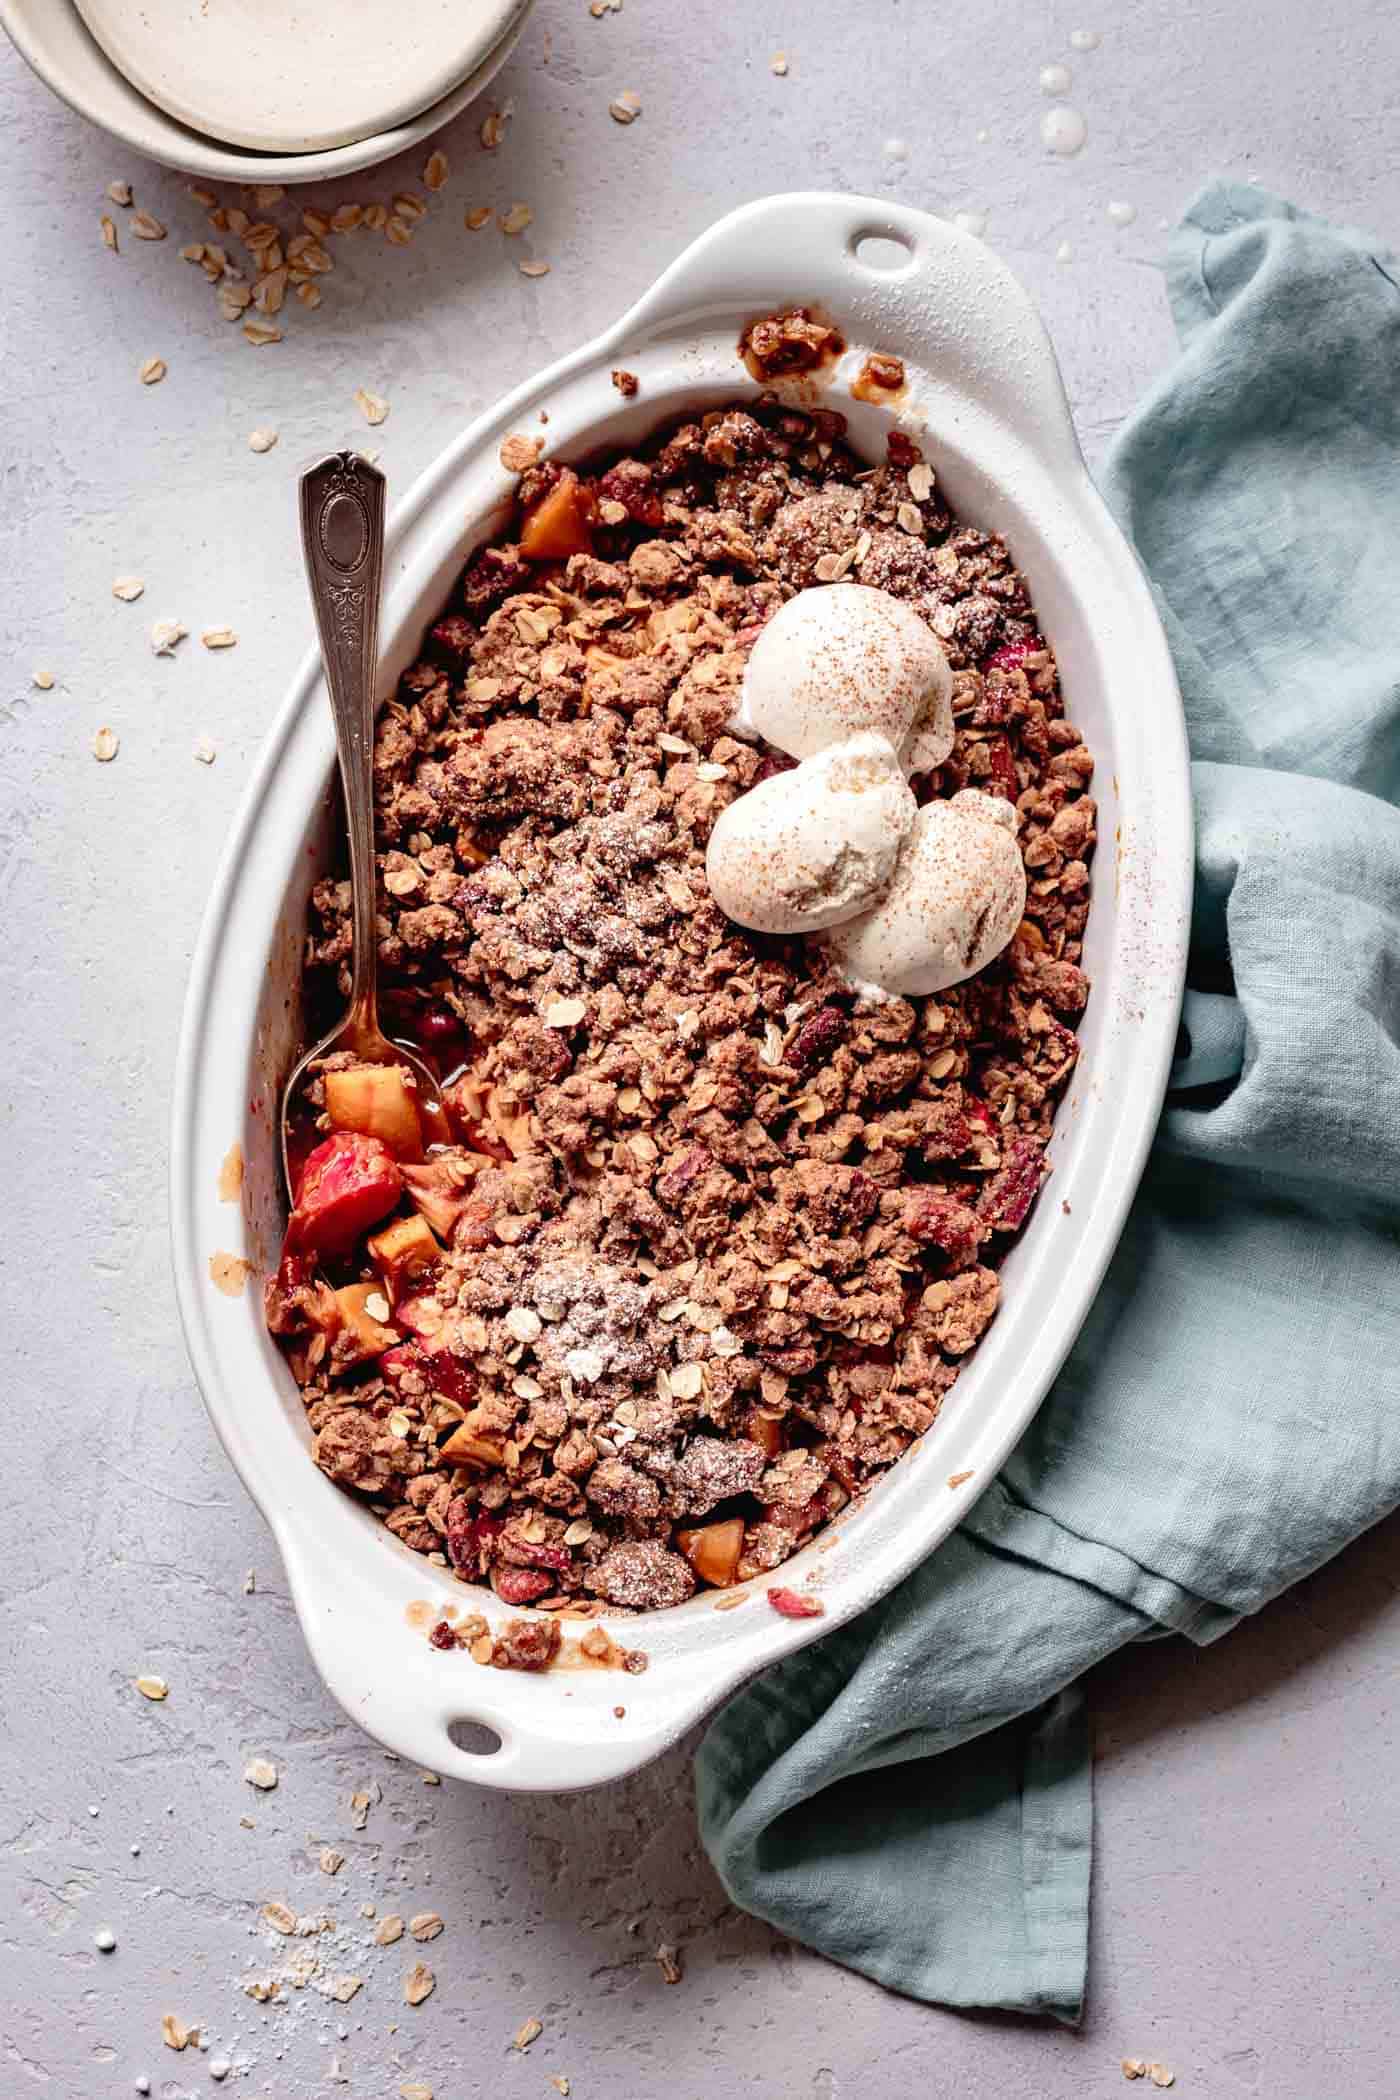 Baked rhubarb and apple crisp with ginger and maple